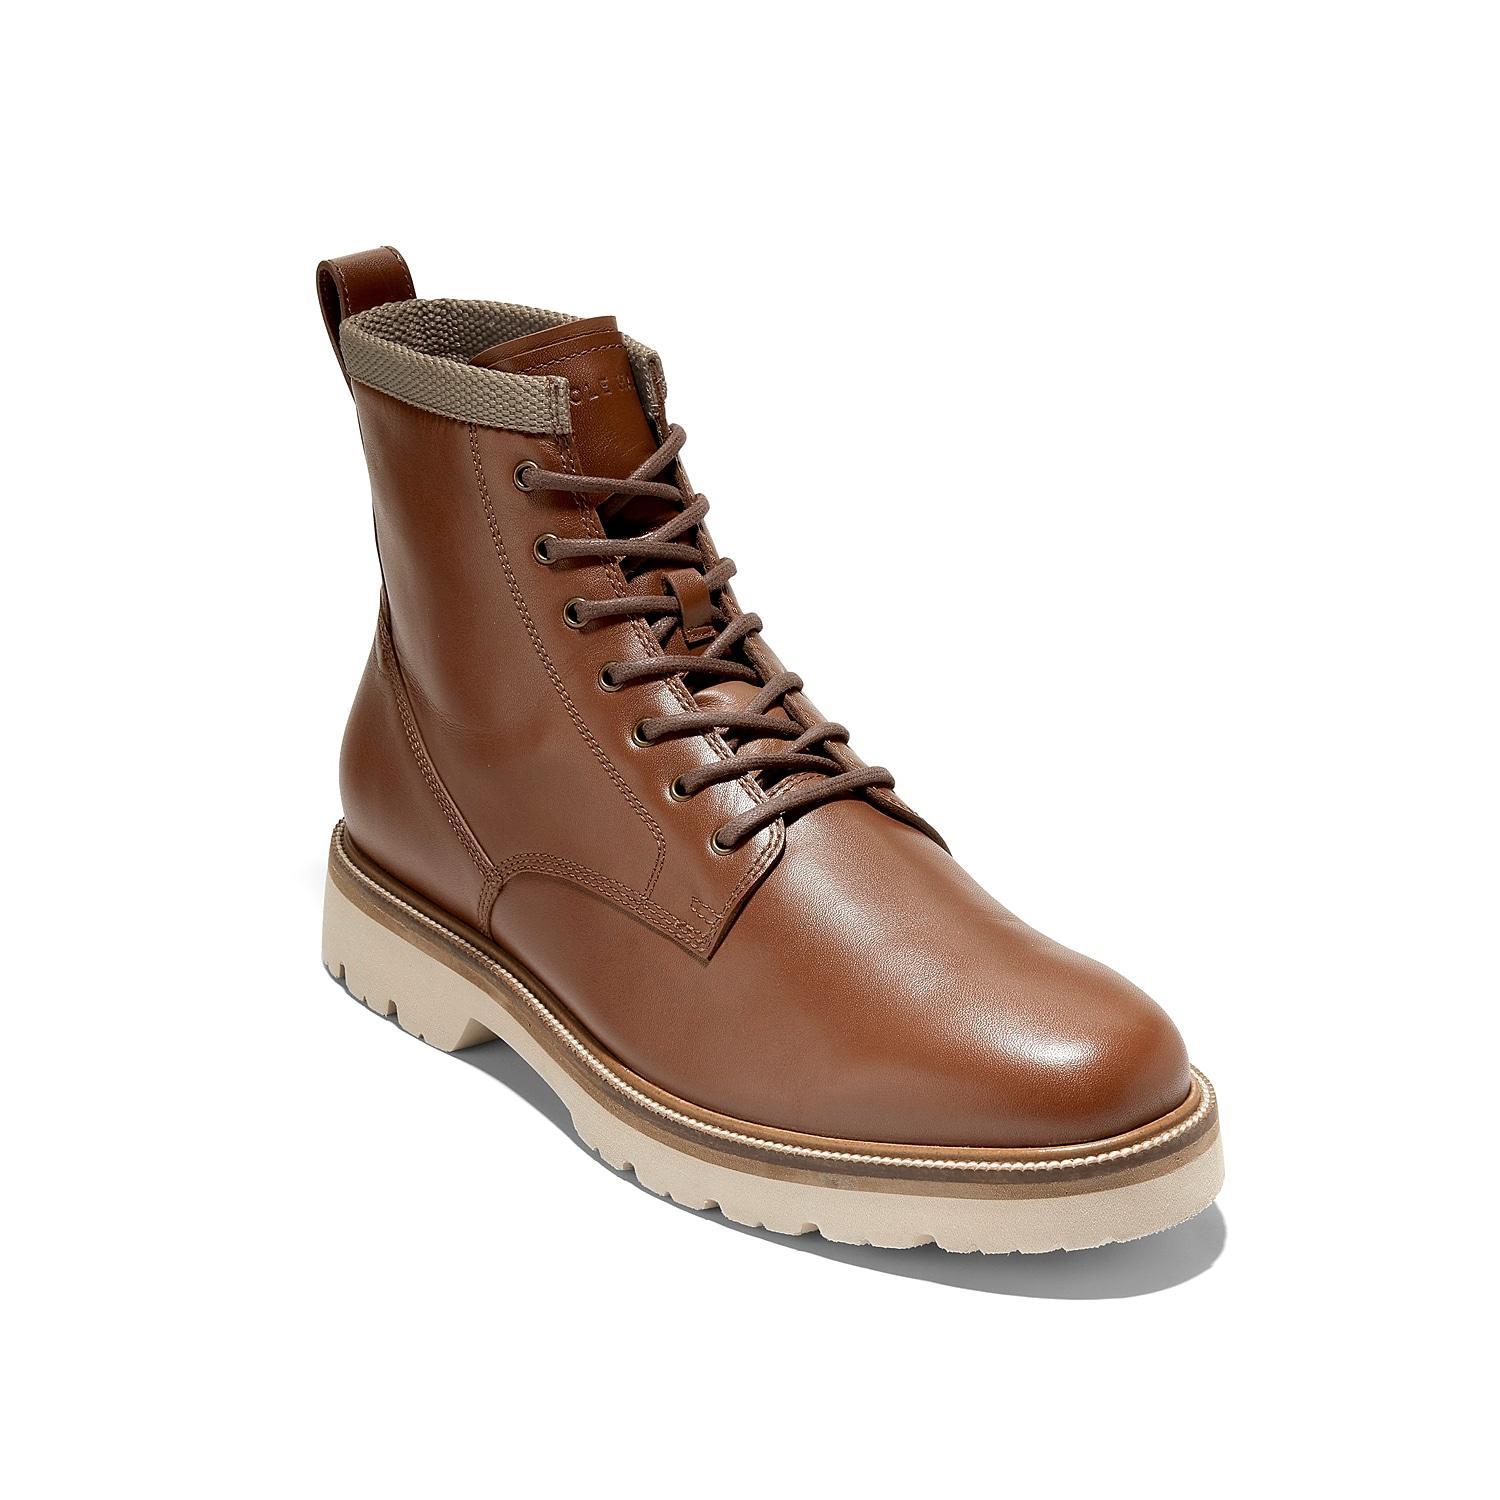 Cole Haan American Classic Waterproof Plain Toe Lace-Up Boot Product Image